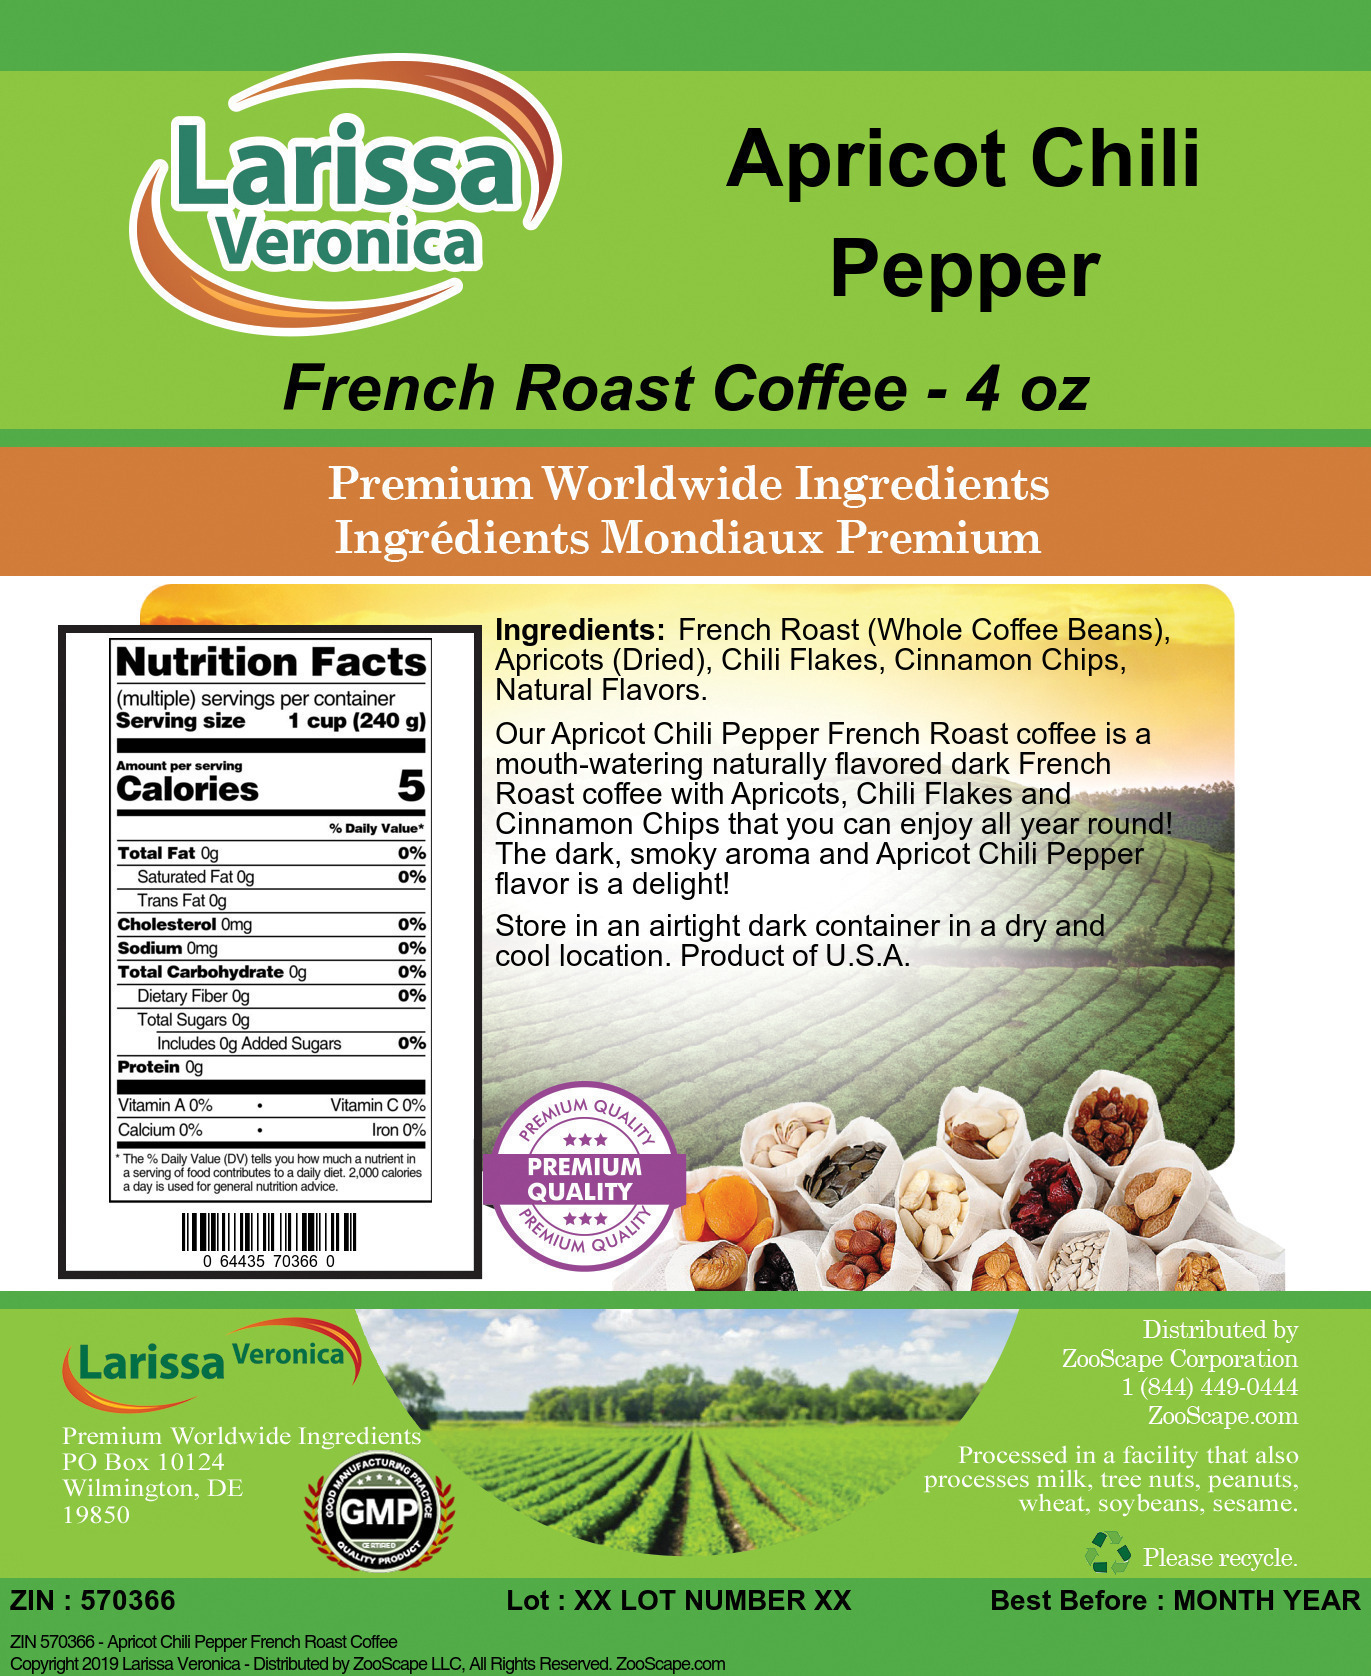 Apricot Chili Pepper French Roast Coffee - Label